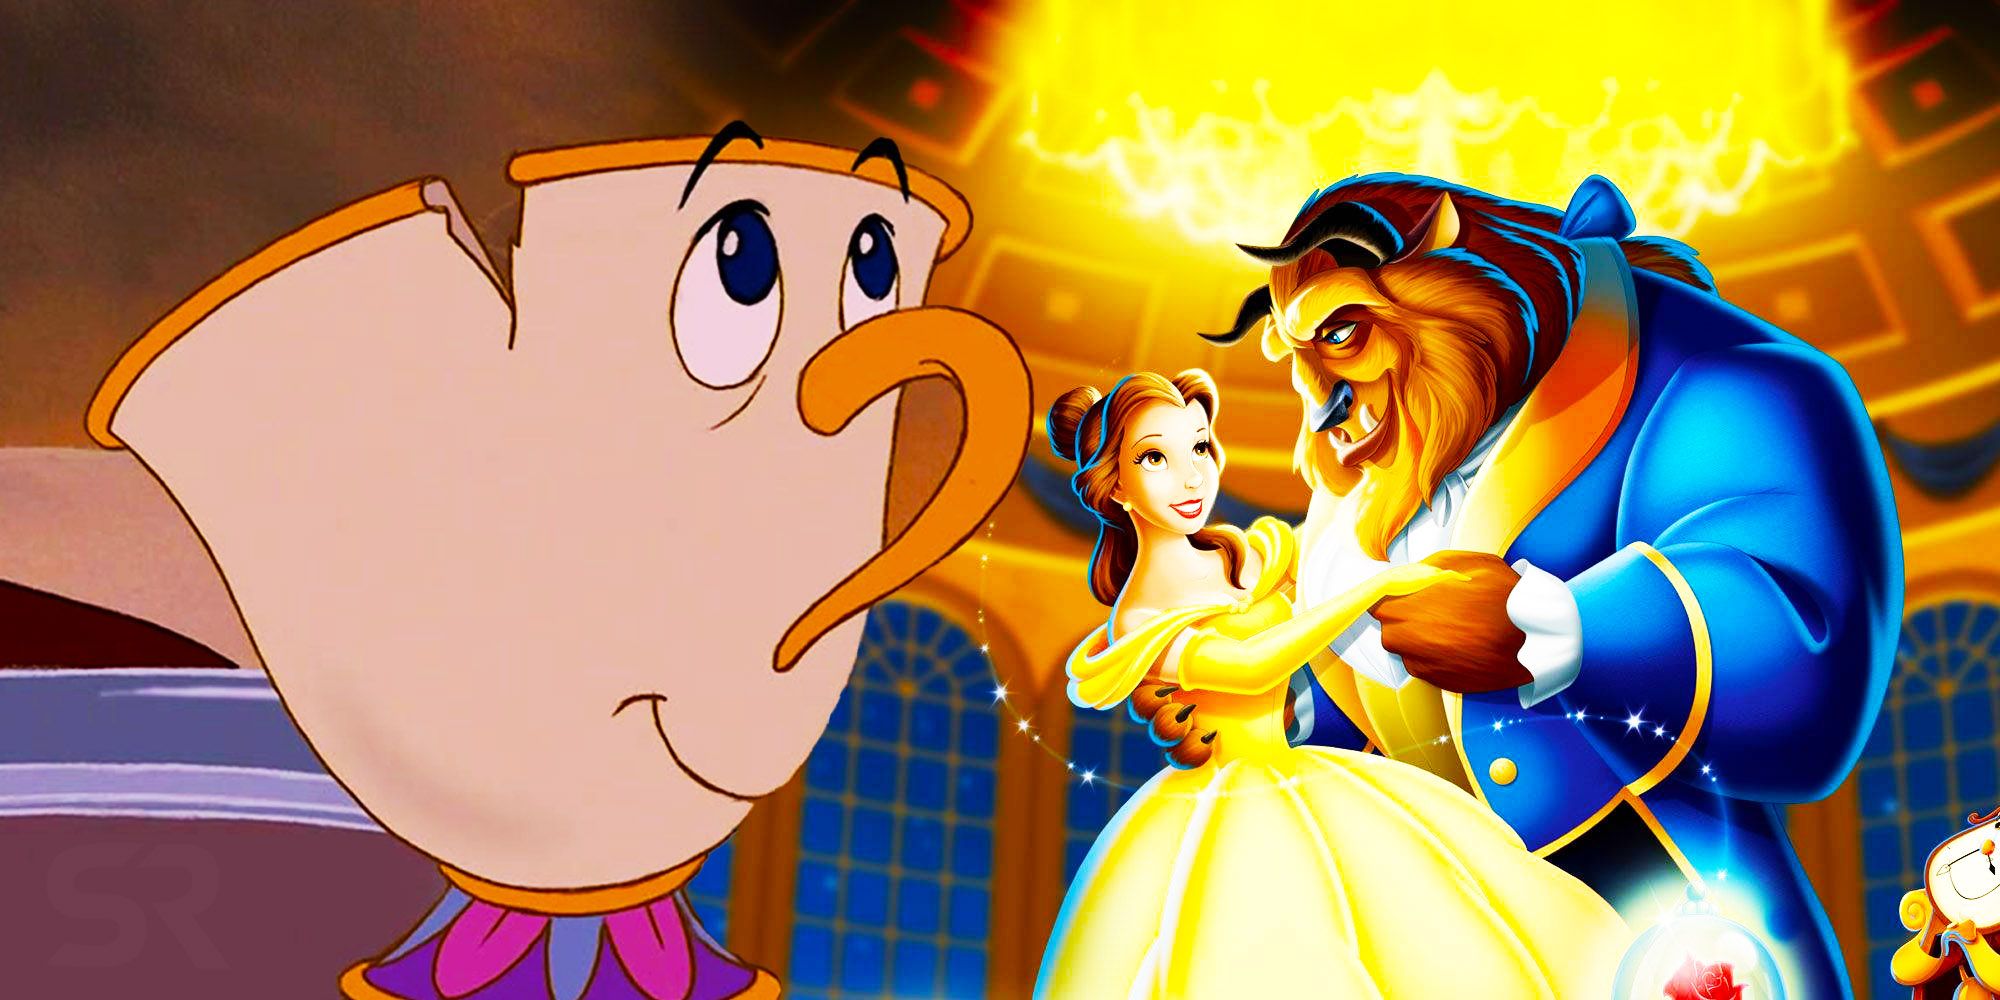 What Time Period Beauty And The Beast Is Set In (It's Later Than